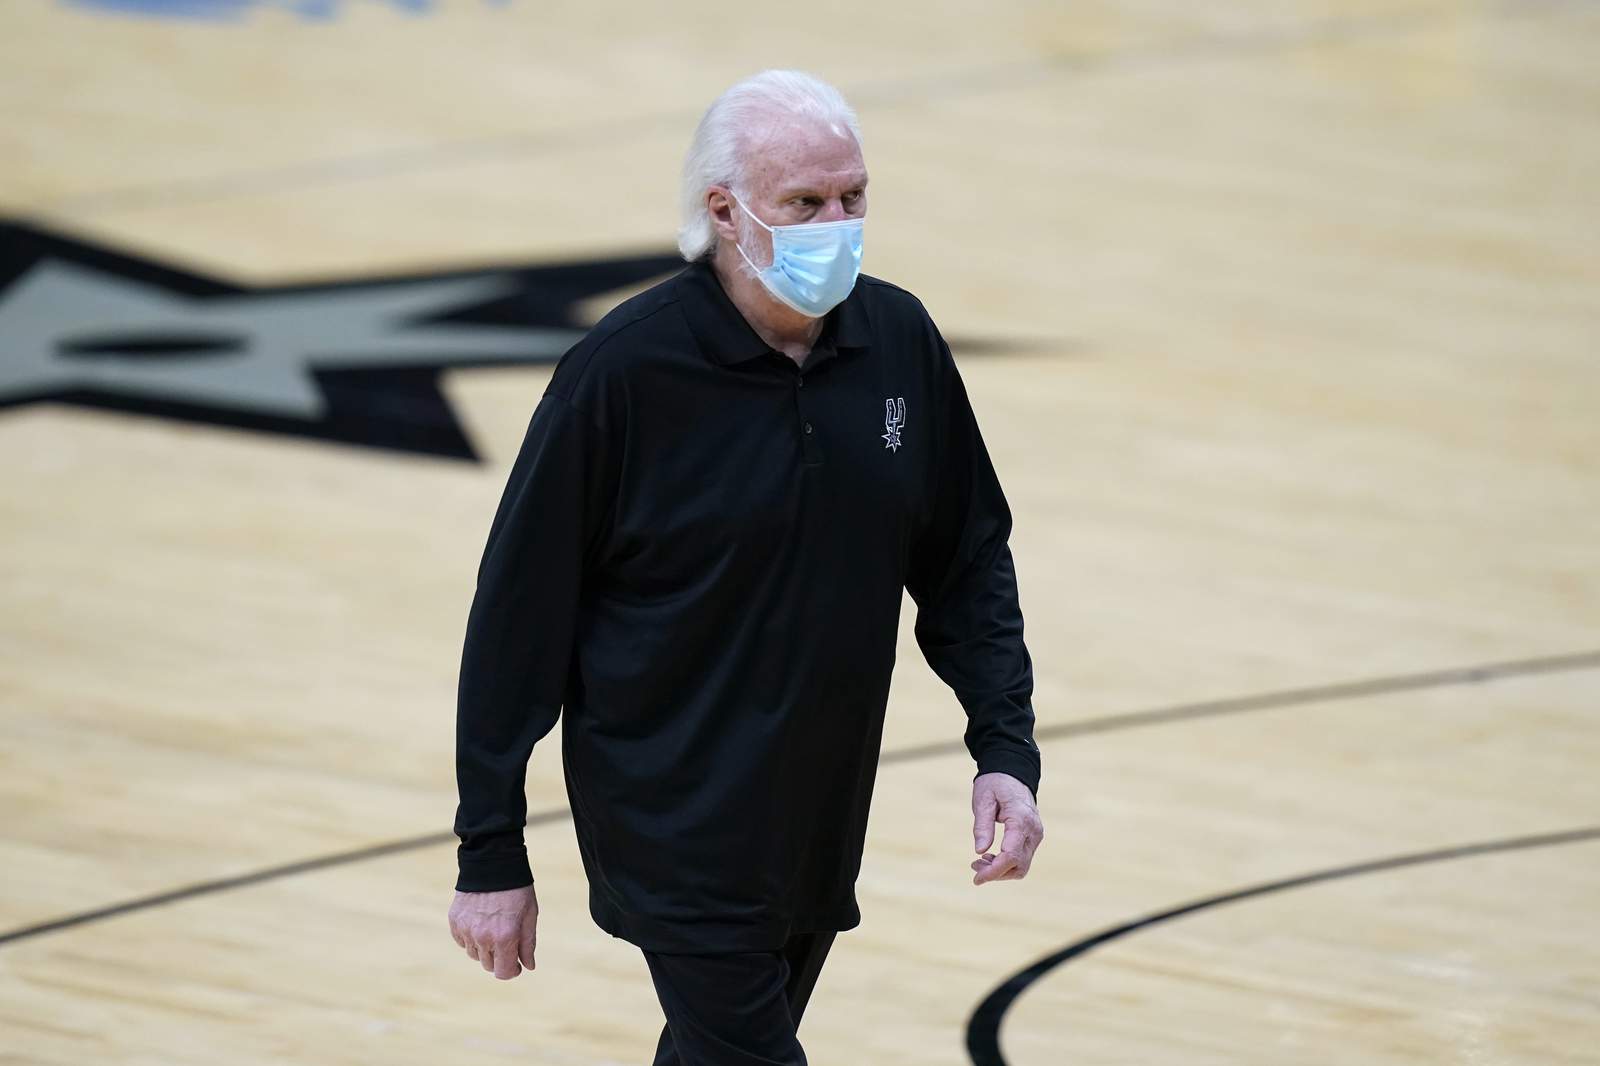 Spurs to require masks for fans; Popovich blasts Abbott’s decision, calling it ‘mystifying’ and ‘ignorant’